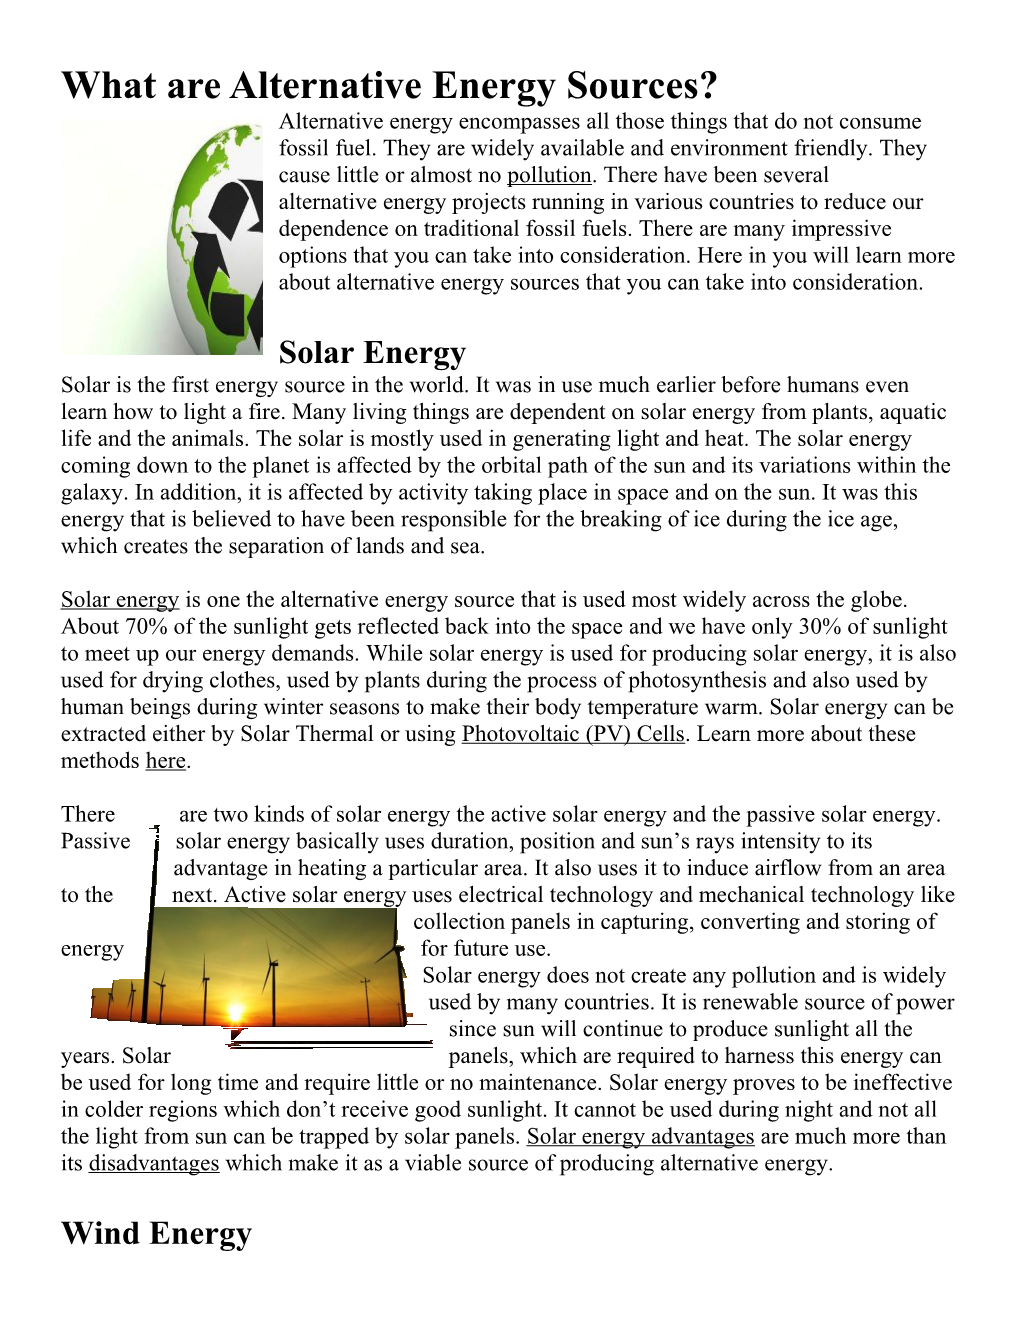 What Are Alternative Energy Sources?